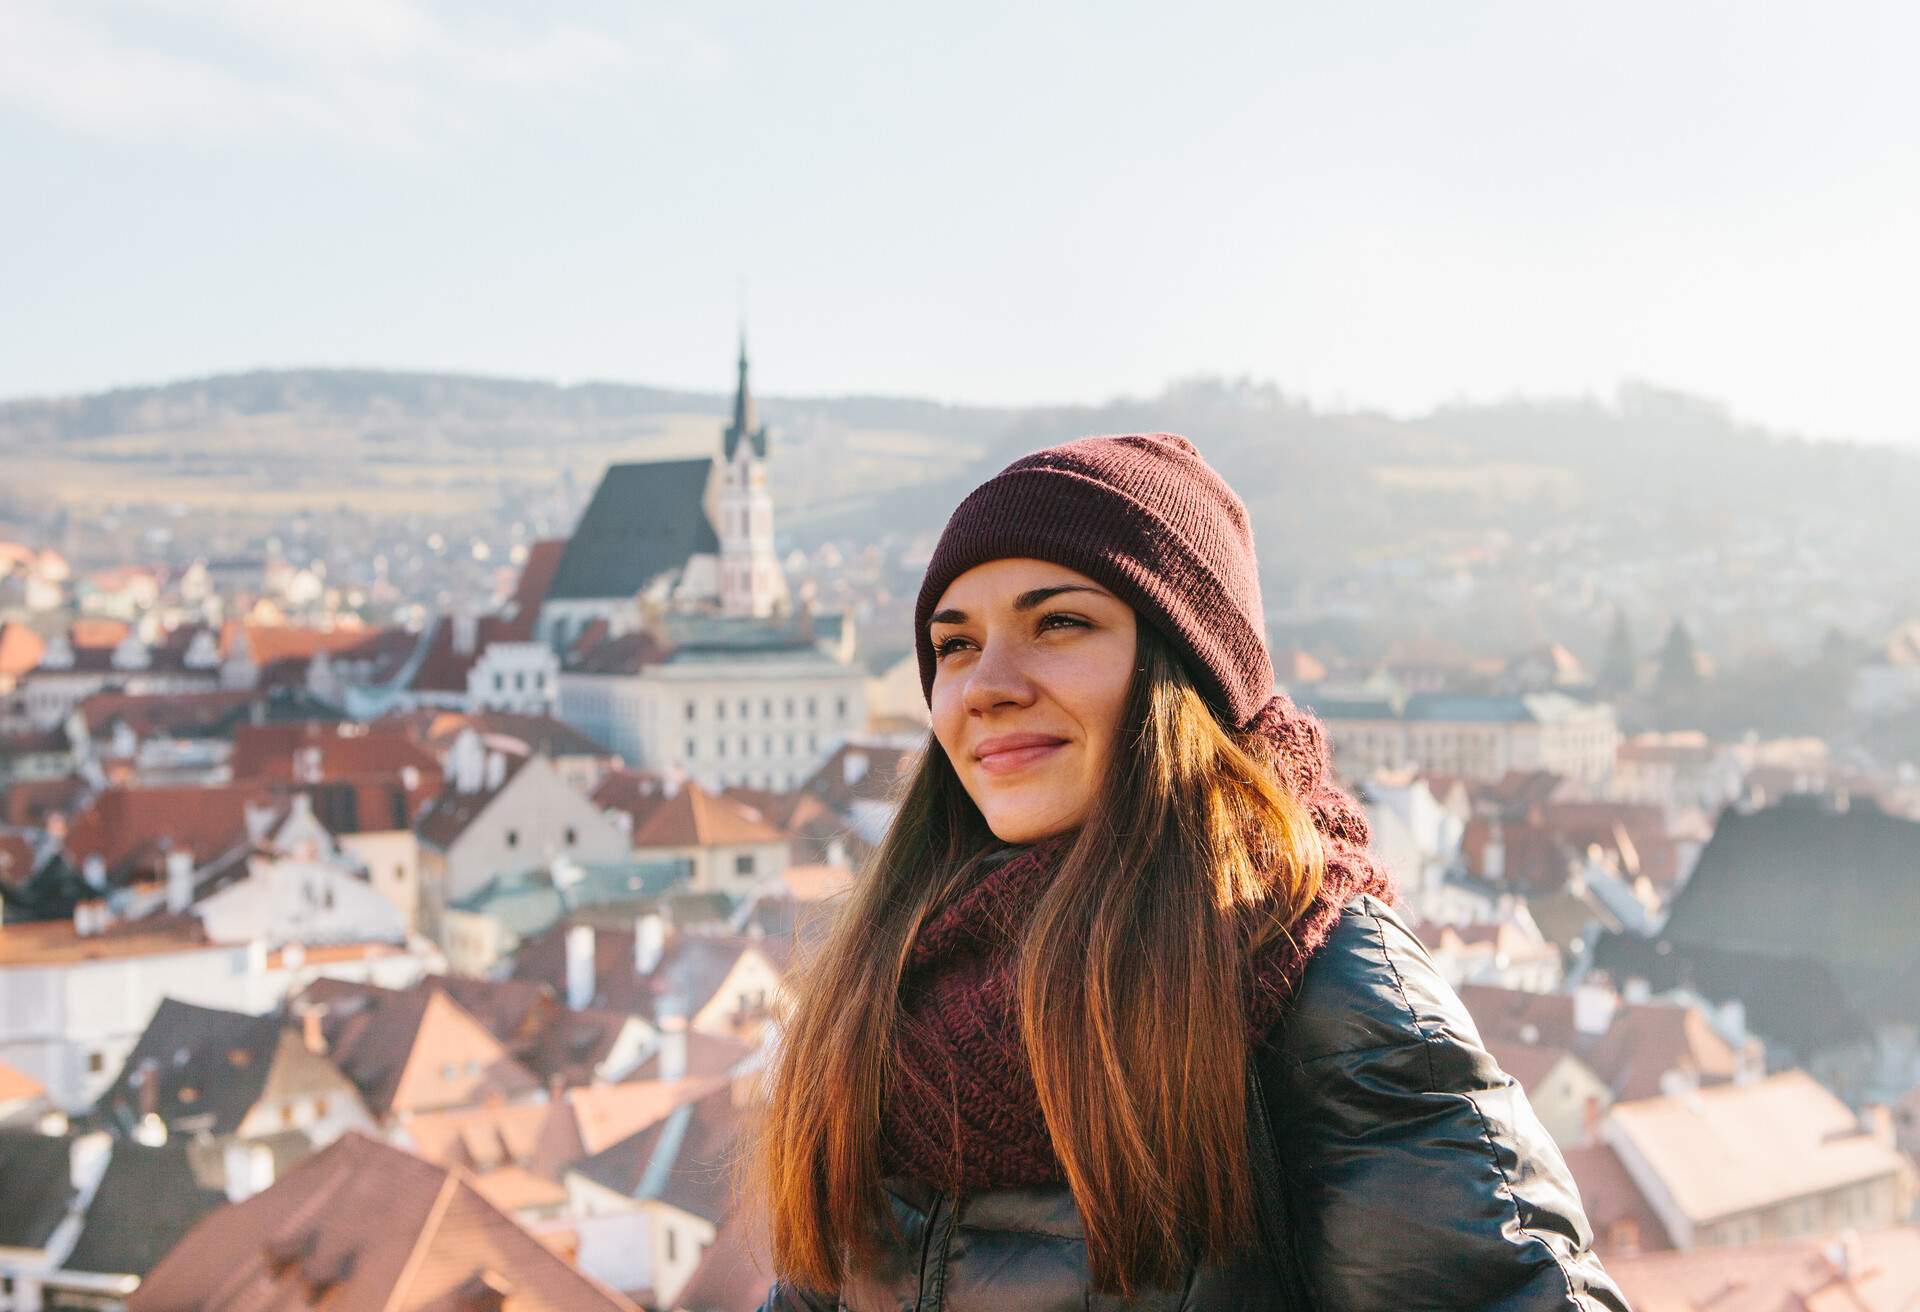 Portrait of a tourist girl who visits the sights in Cesky Krumlov in the Czech Republic in winter.; Shutterstock ID 1238885062